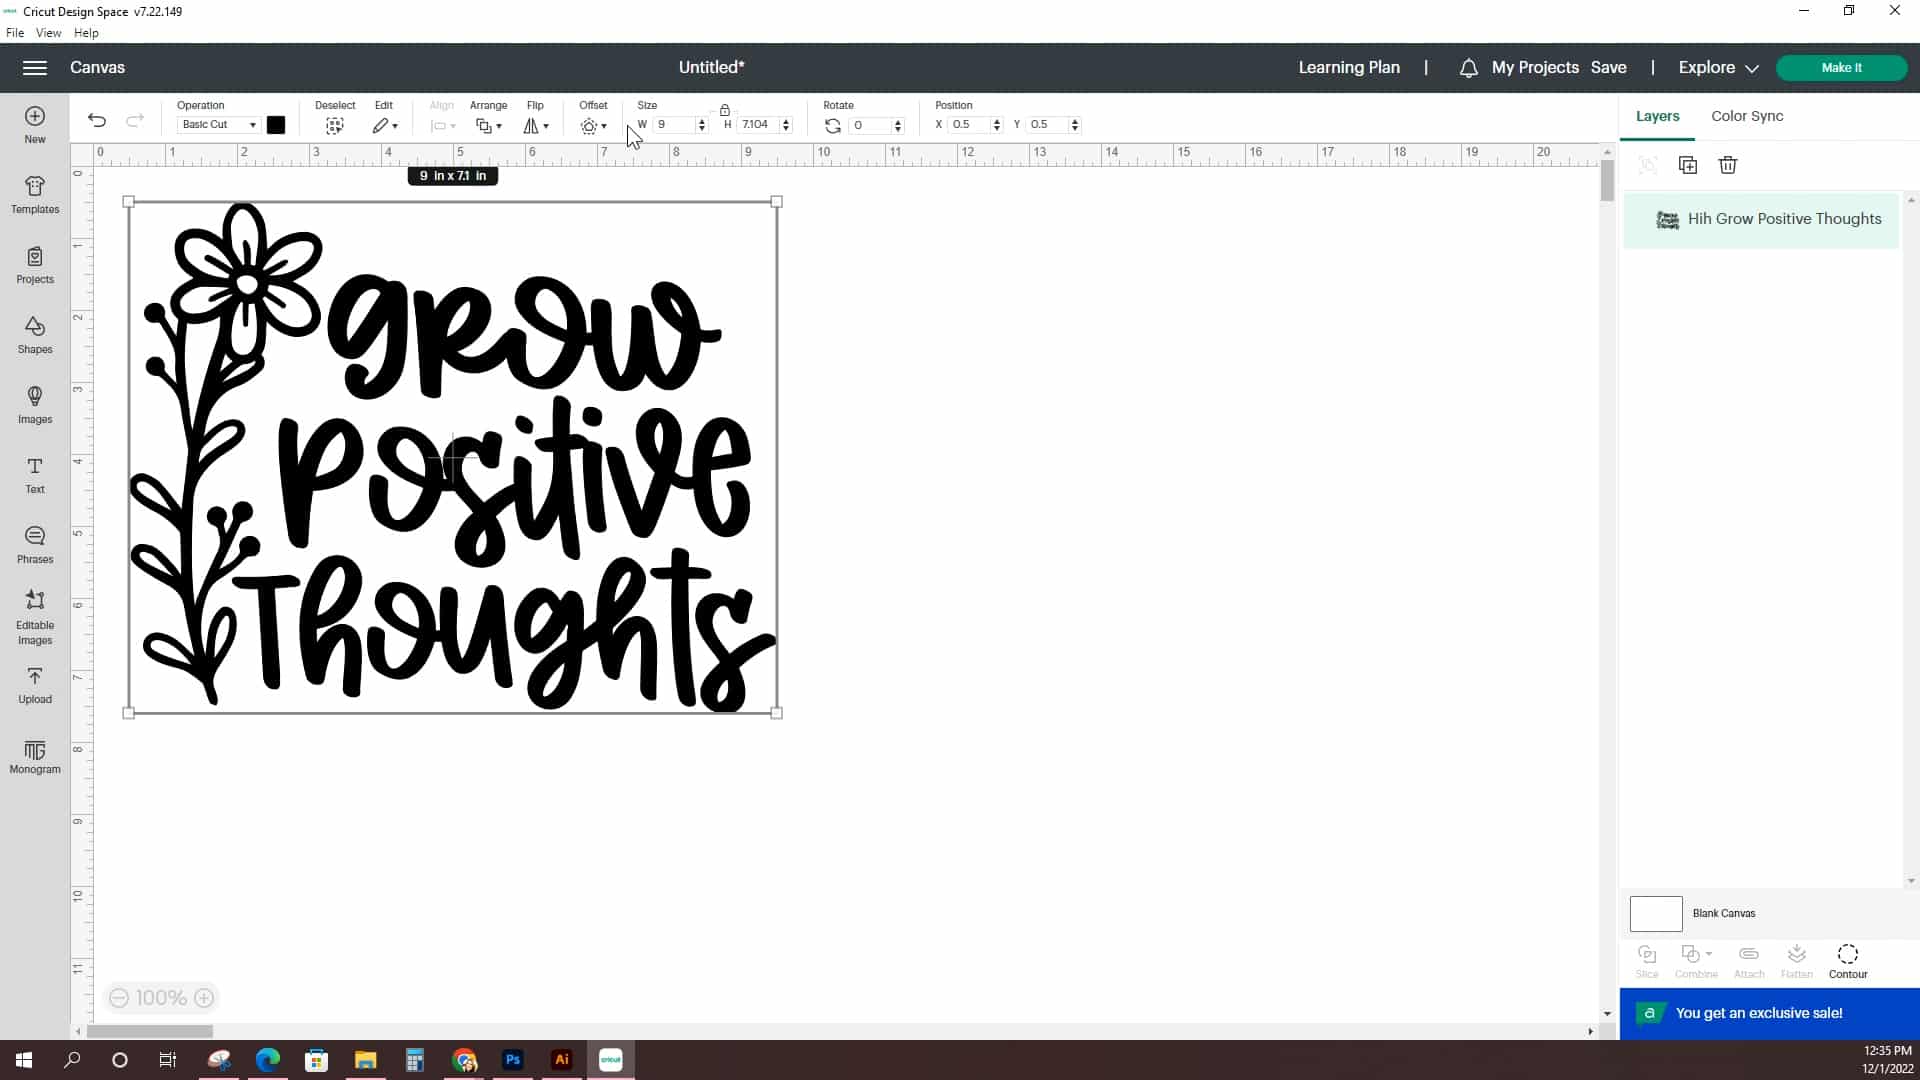 Screenshot of Cricut Design Space software with "Grow Positive Thoughts" SVG uploaded to the canvas